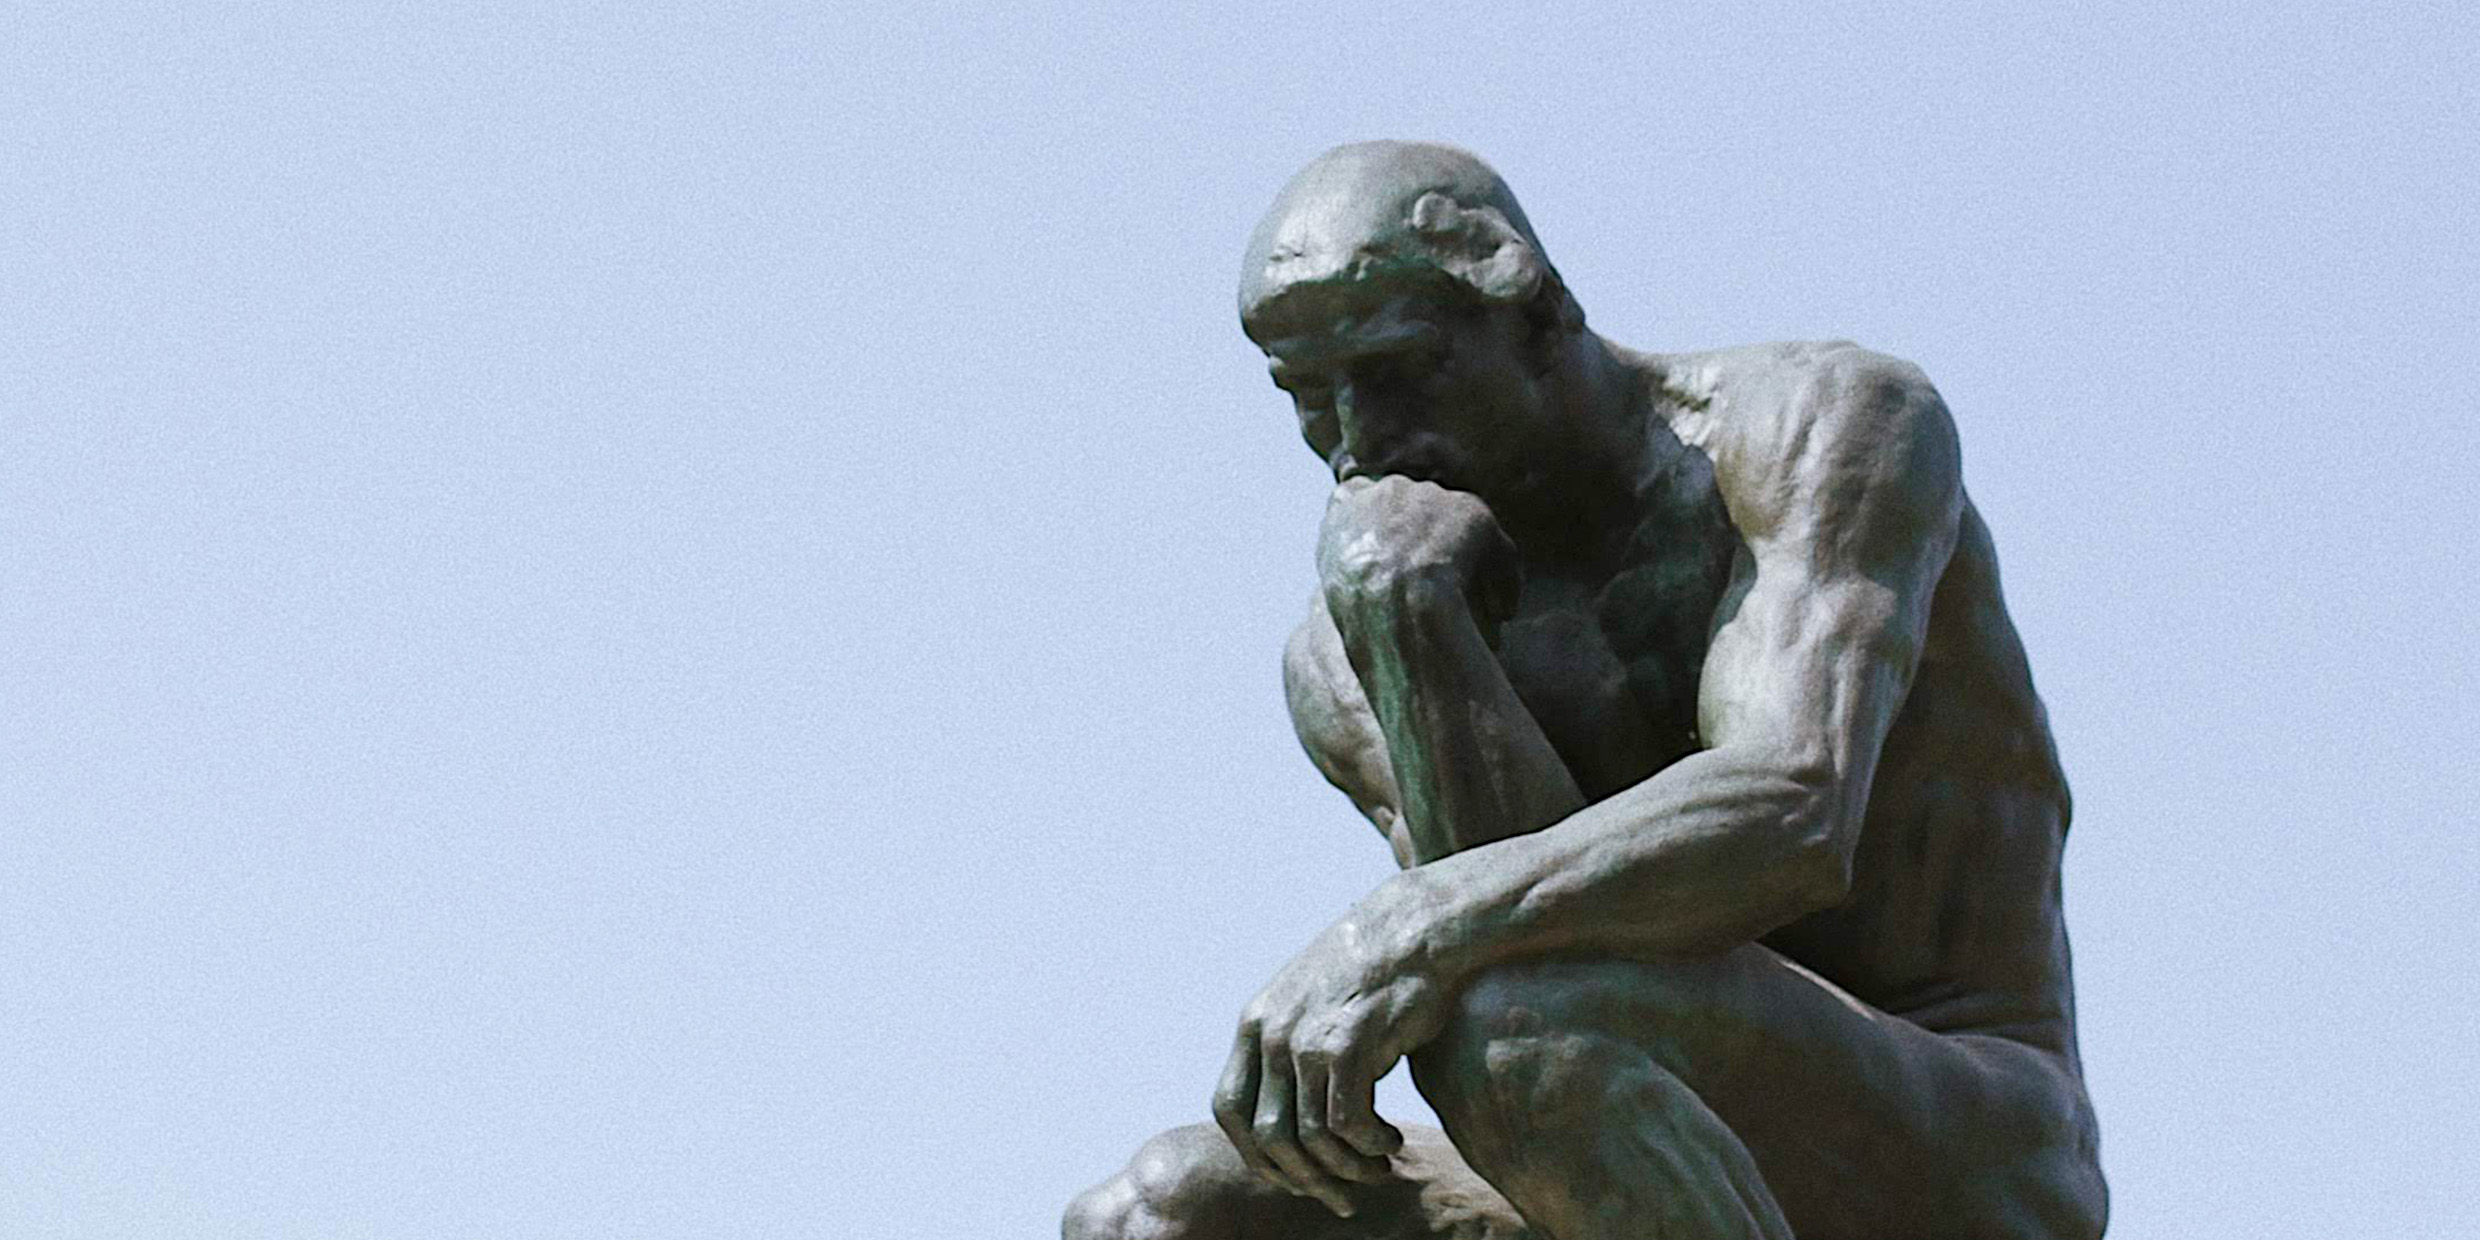 Sculpture of man in thought by Rodin